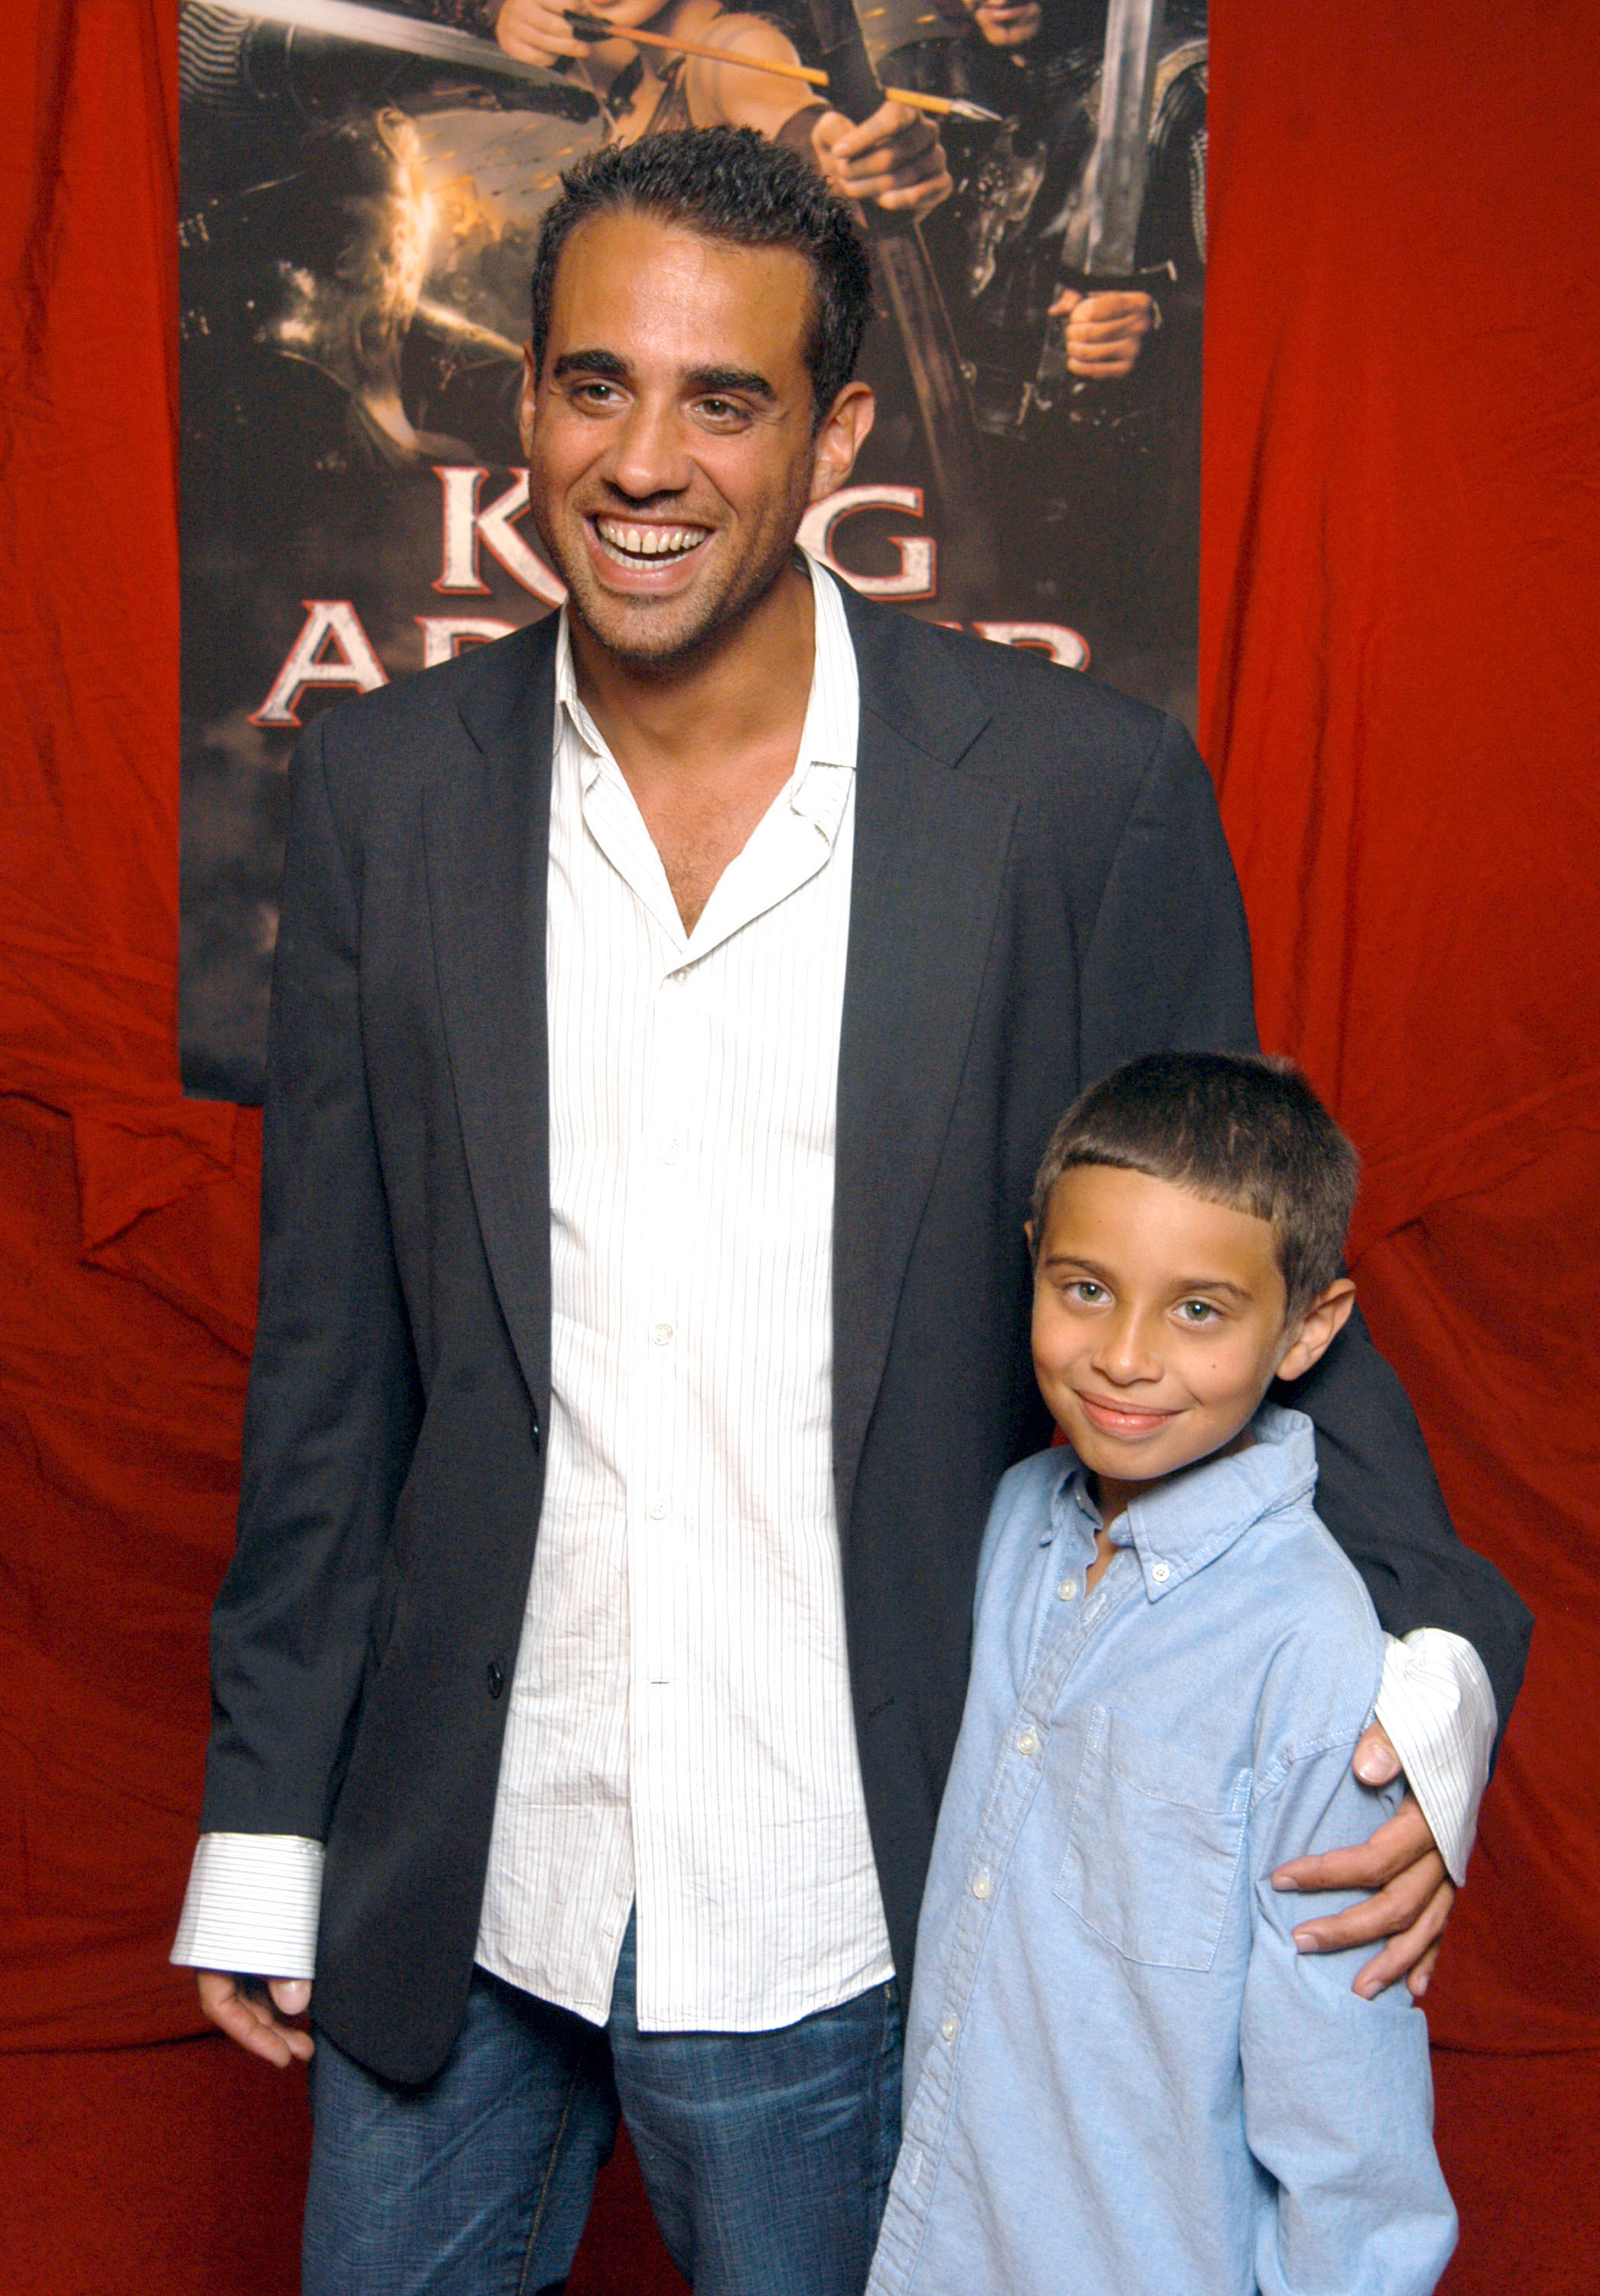 <p>Bobby Cannavale brought son Jake -- whose mom is screenwriter Jenny Lumet, grandfather is director Sidney Lumet and great-grandmother is singer-actress Lena Horne -- to the premiere of "King Arthur" in New York City on June 28, 2004, when Jake was 9. Keep reading to see Jake as an adult...</p>